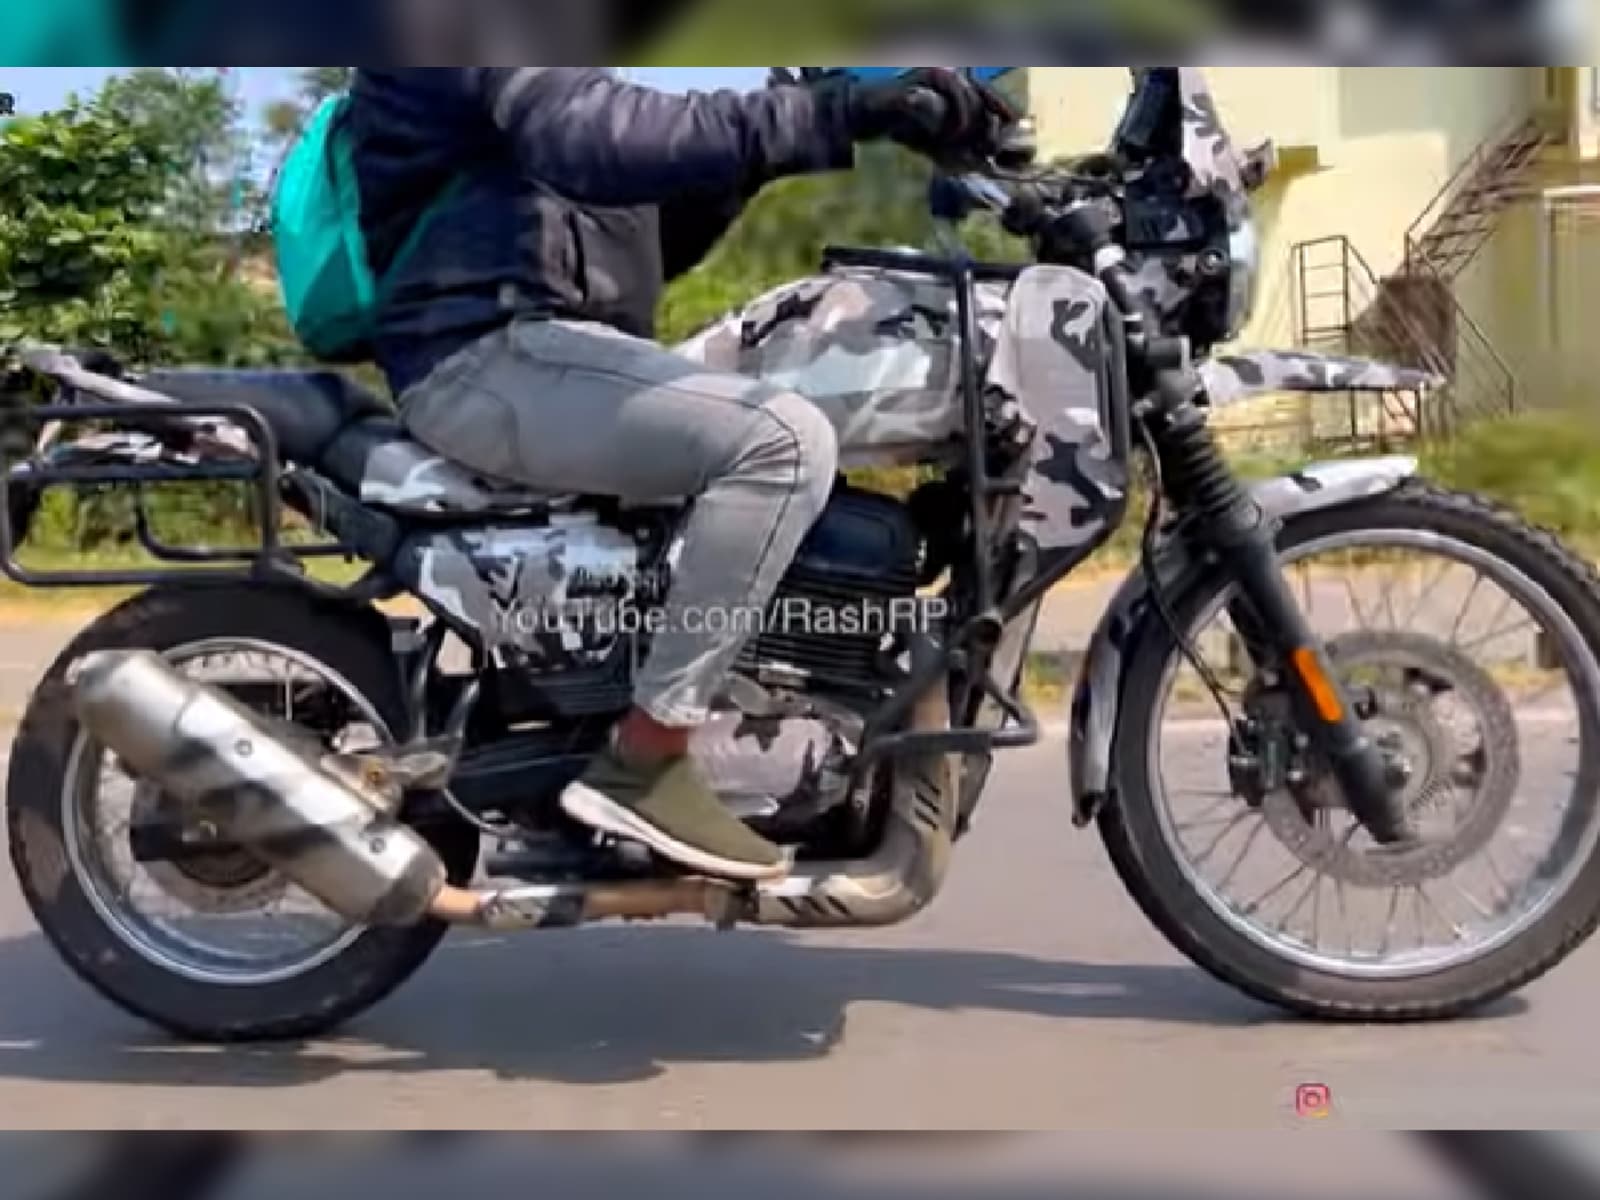 Upcoming Yezdi Roadking Adventure And Scrambler Motorcycles Spied On Video